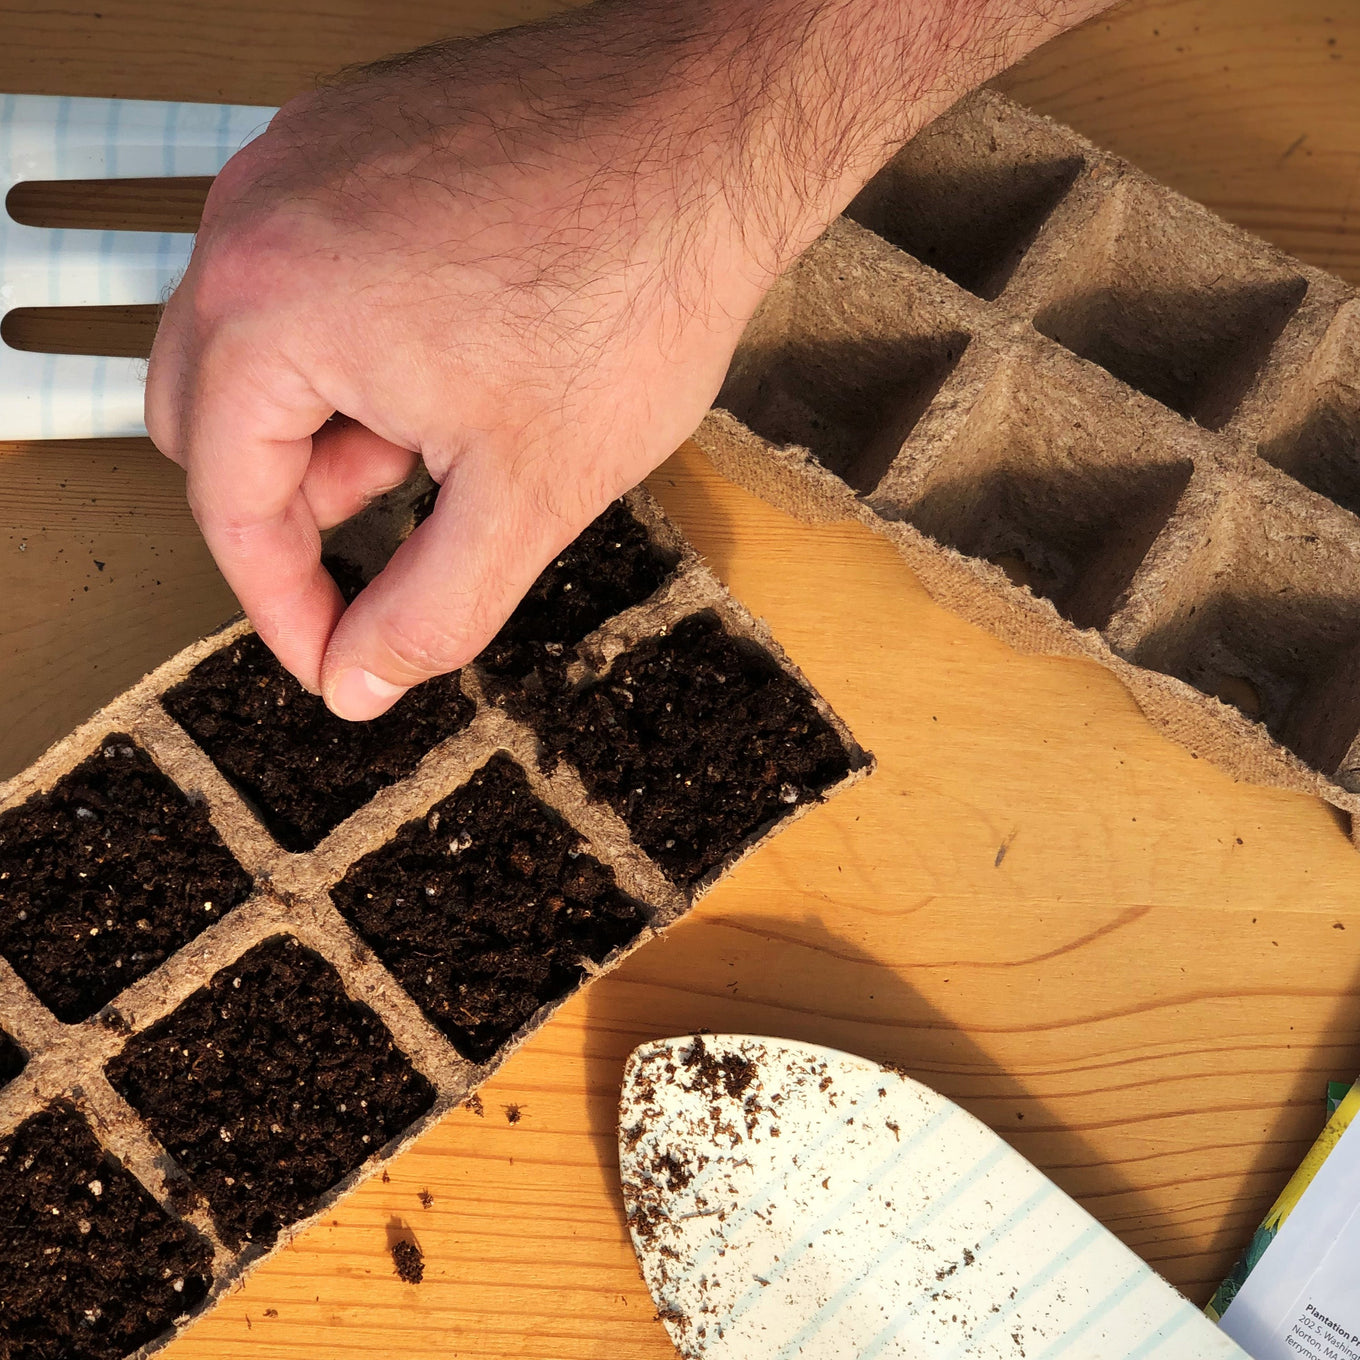 Start your Early White Bush Scallop Squash seeds in Jiffy biodegradable peat strip trays which easily tear apart for seedling transplanting. Tray can be planted in garden and will help prevent root shock.